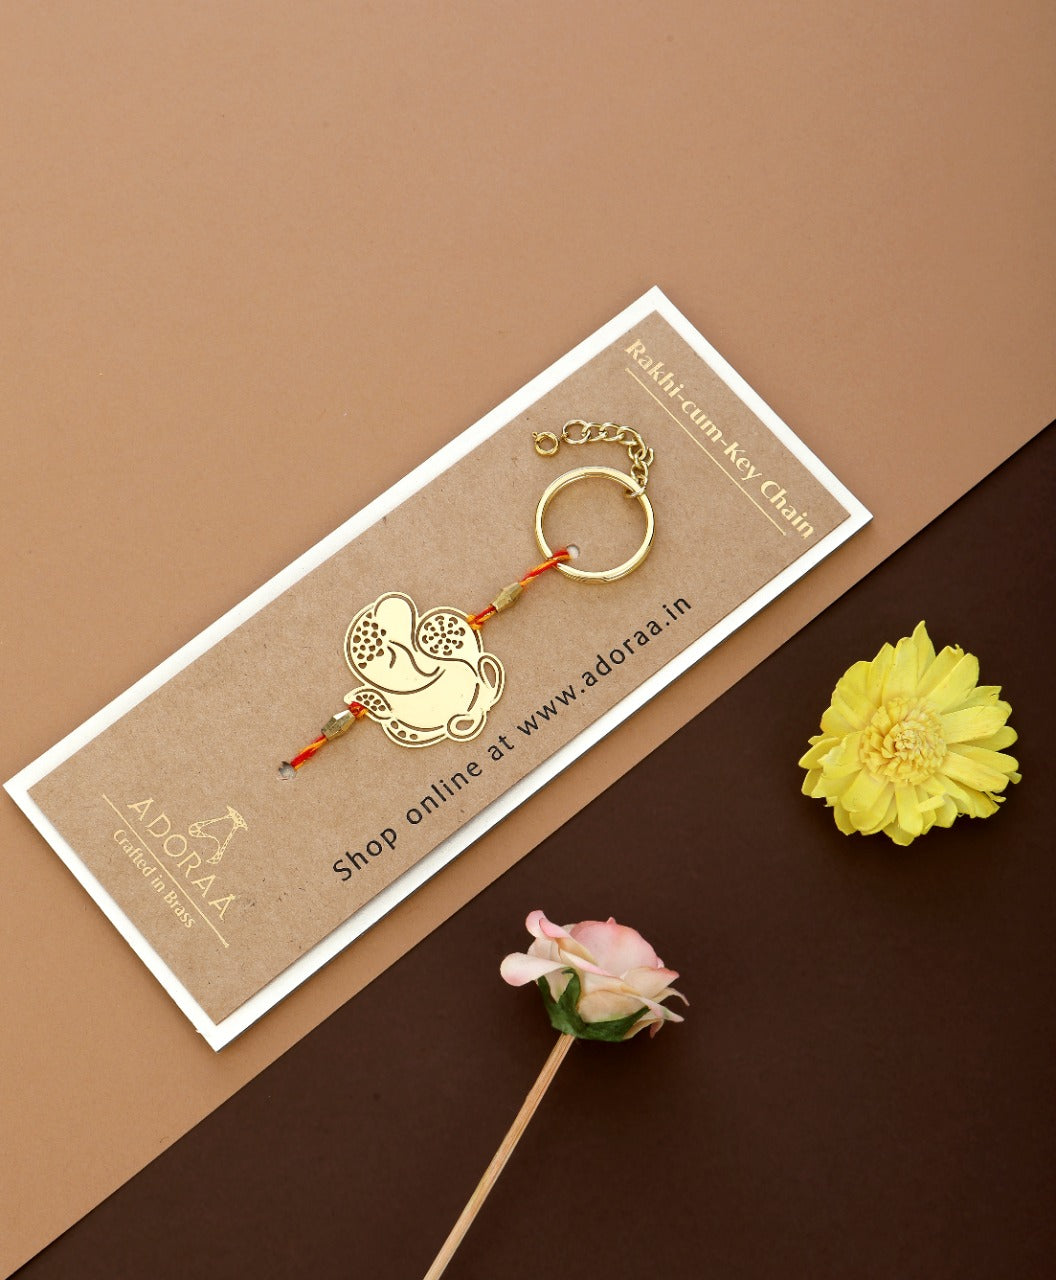 ADORAA's Ganesha design Rakhi cum keychain ring for Bhai/brother crafted in brass with golden finish